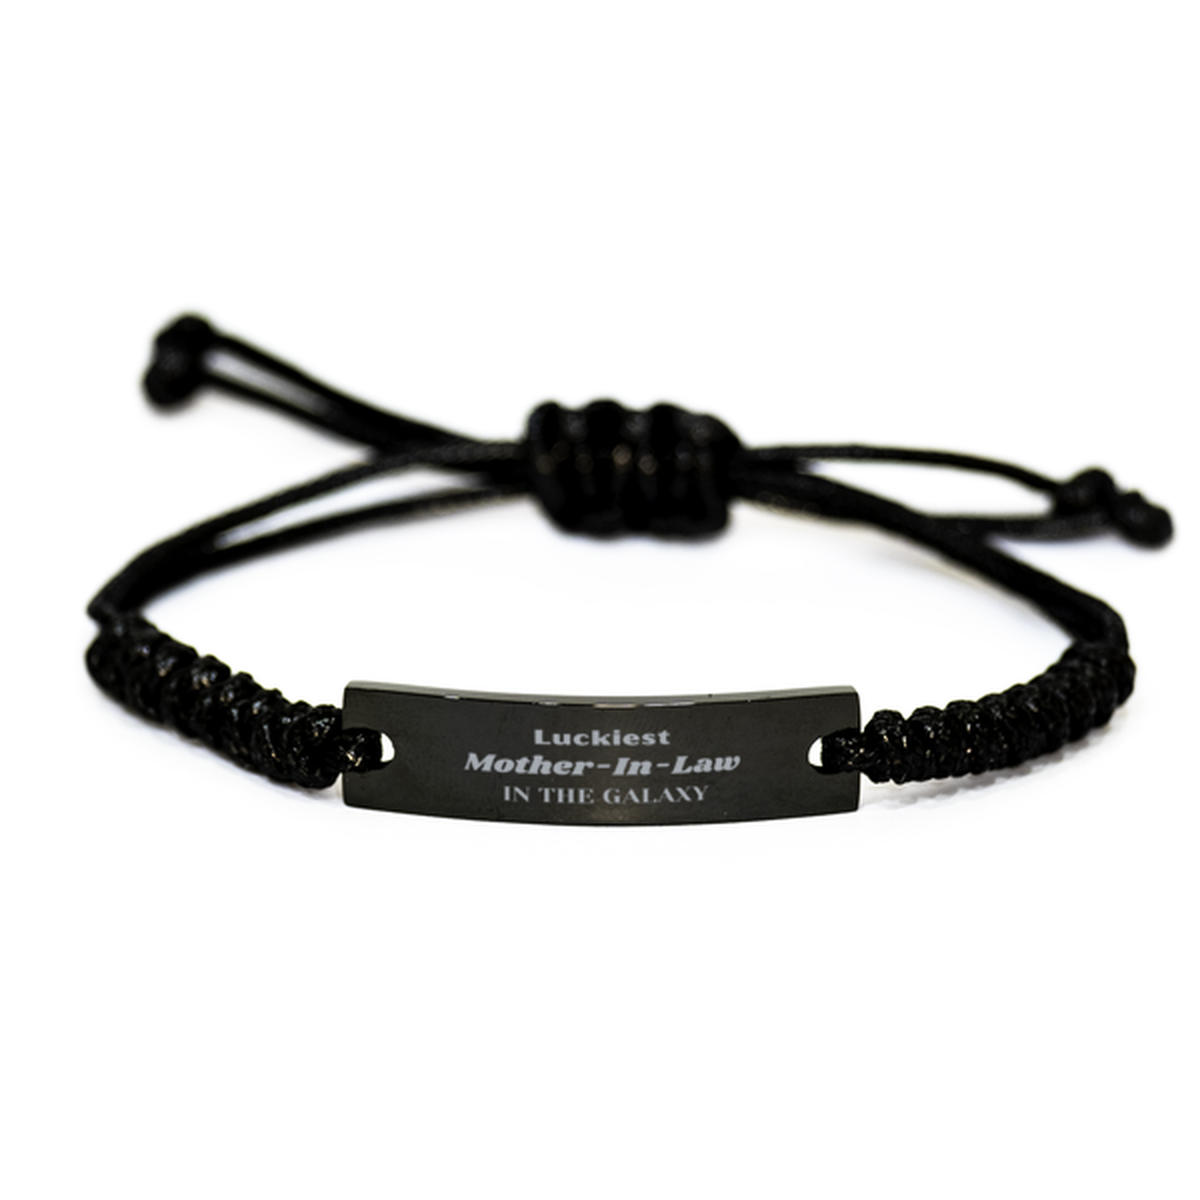 Luckiest Mother-In-Law in the Galaxy, To My Mother-In-Law Engraved Gifts, Christmas Mother-In-Law Black Rope Bracelet Gifts, X-mas Birthday Unique Gifts For Mother-In-Law Men Women